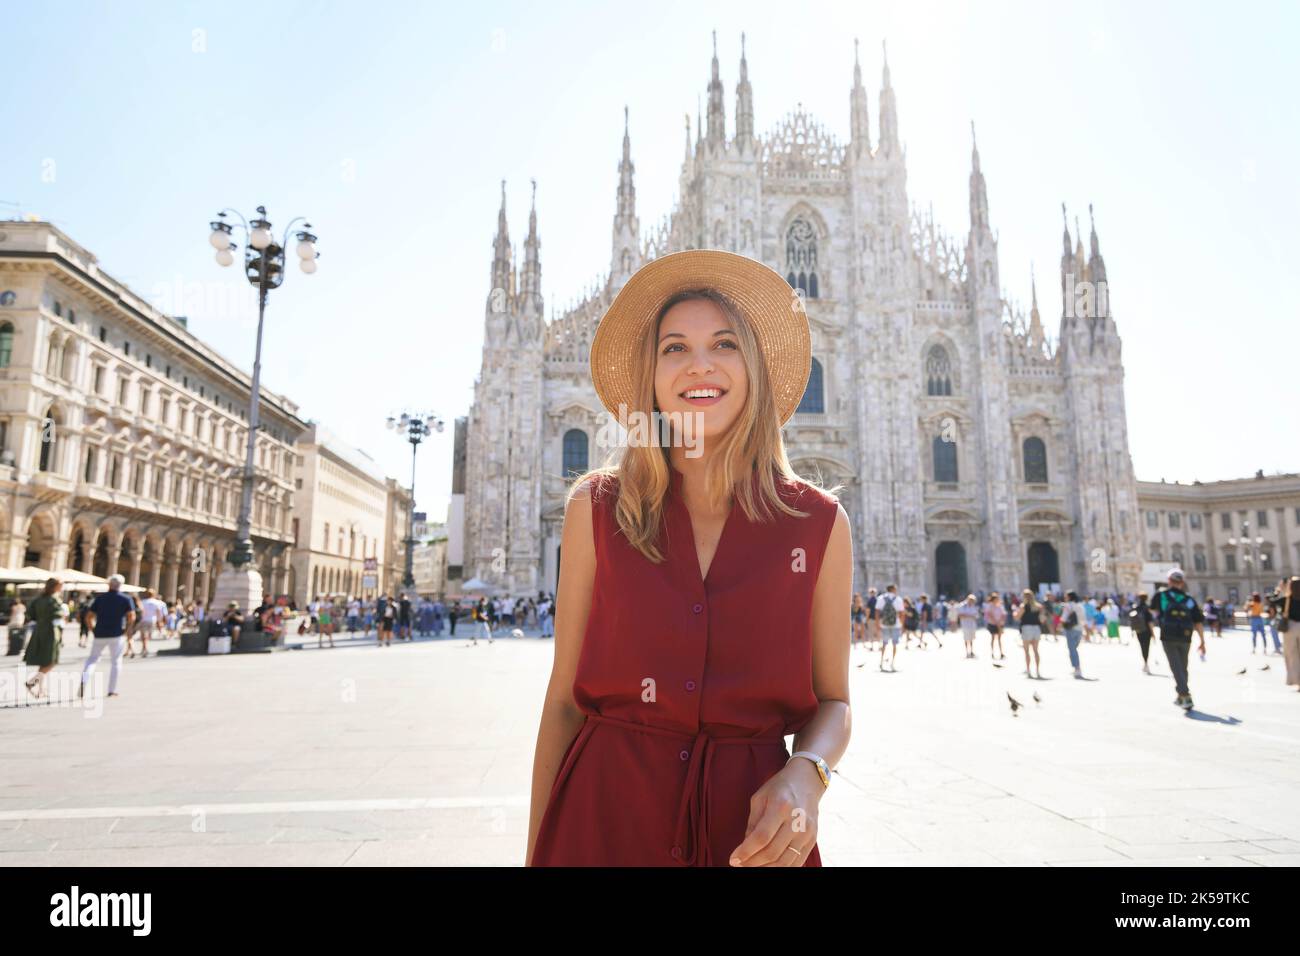 Milan fashion. Young chic woman walking in main square smiling on sunny day. Stock Photo